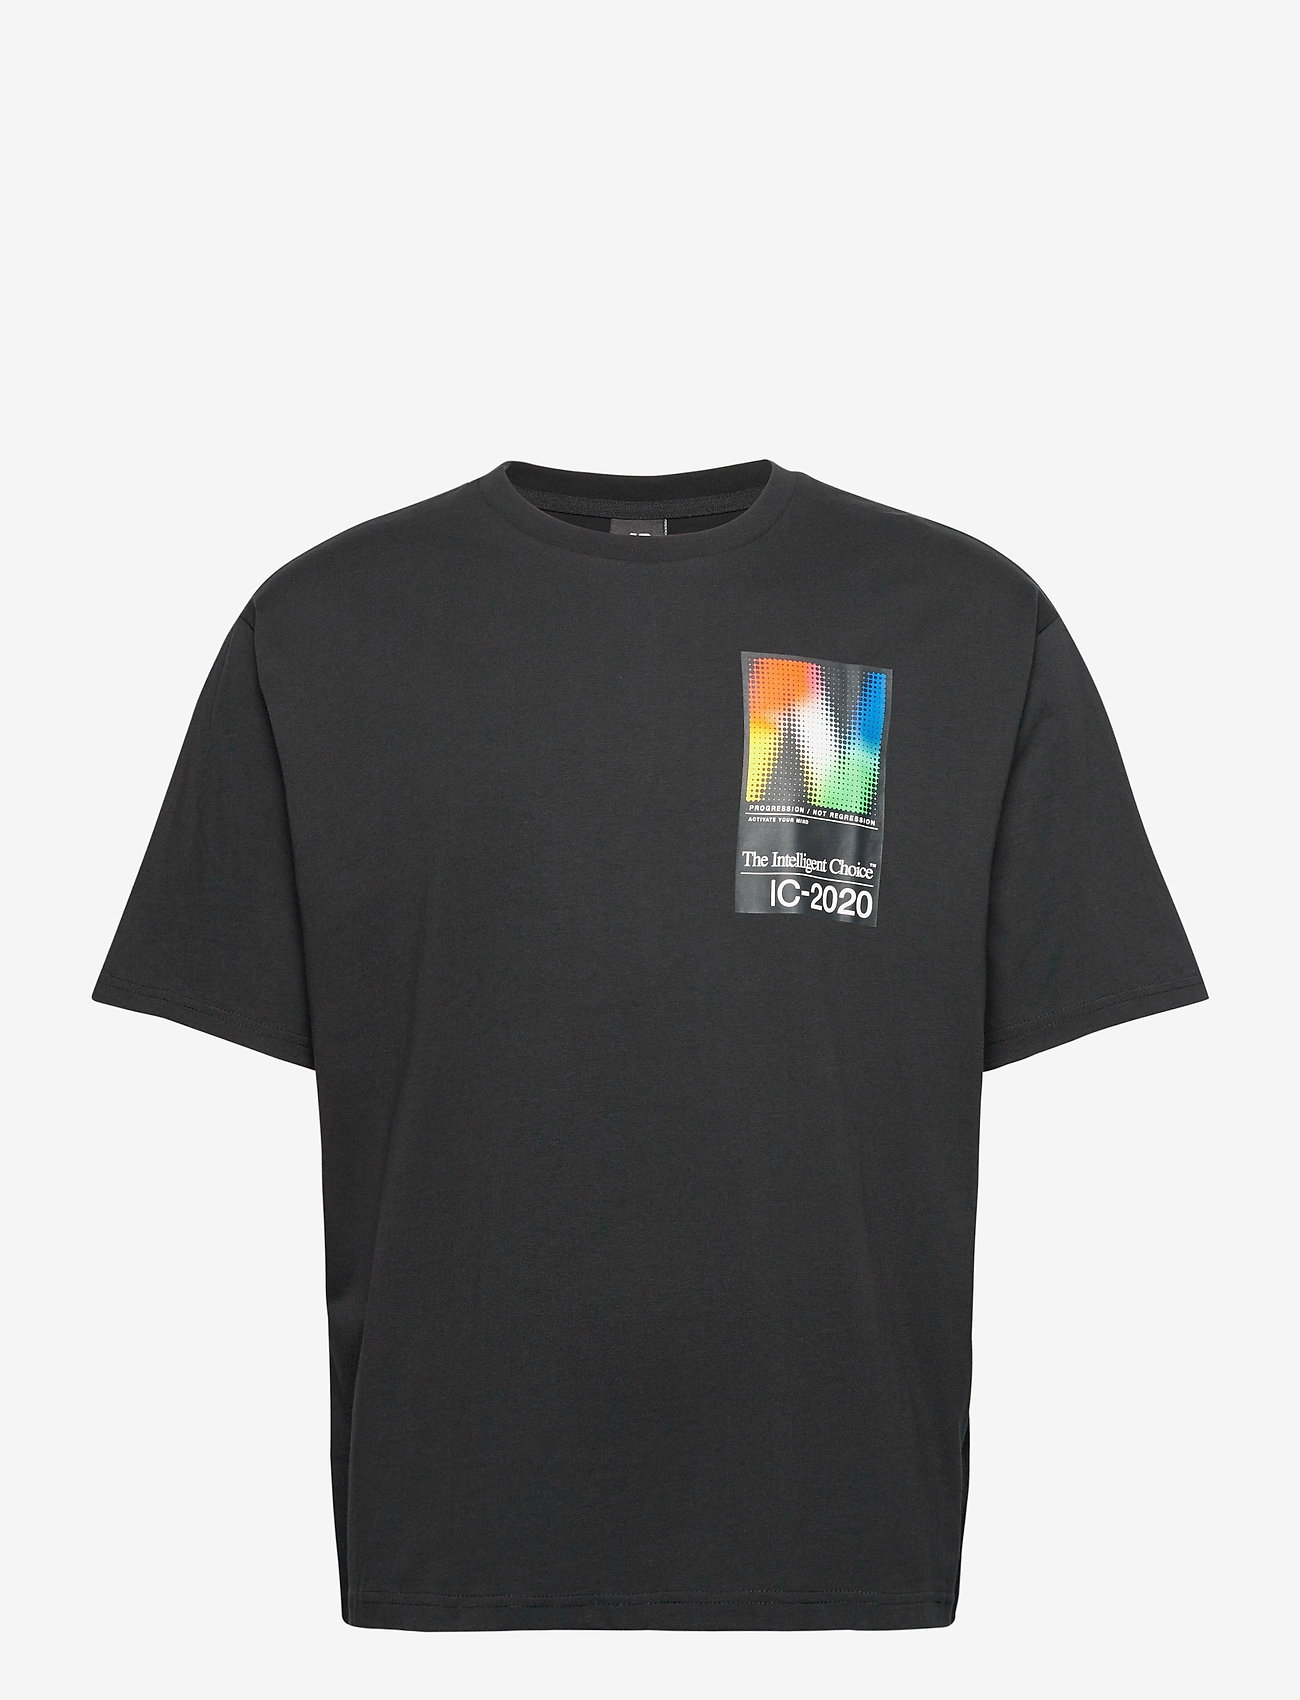 Buy > nb sports t shirts > in stock